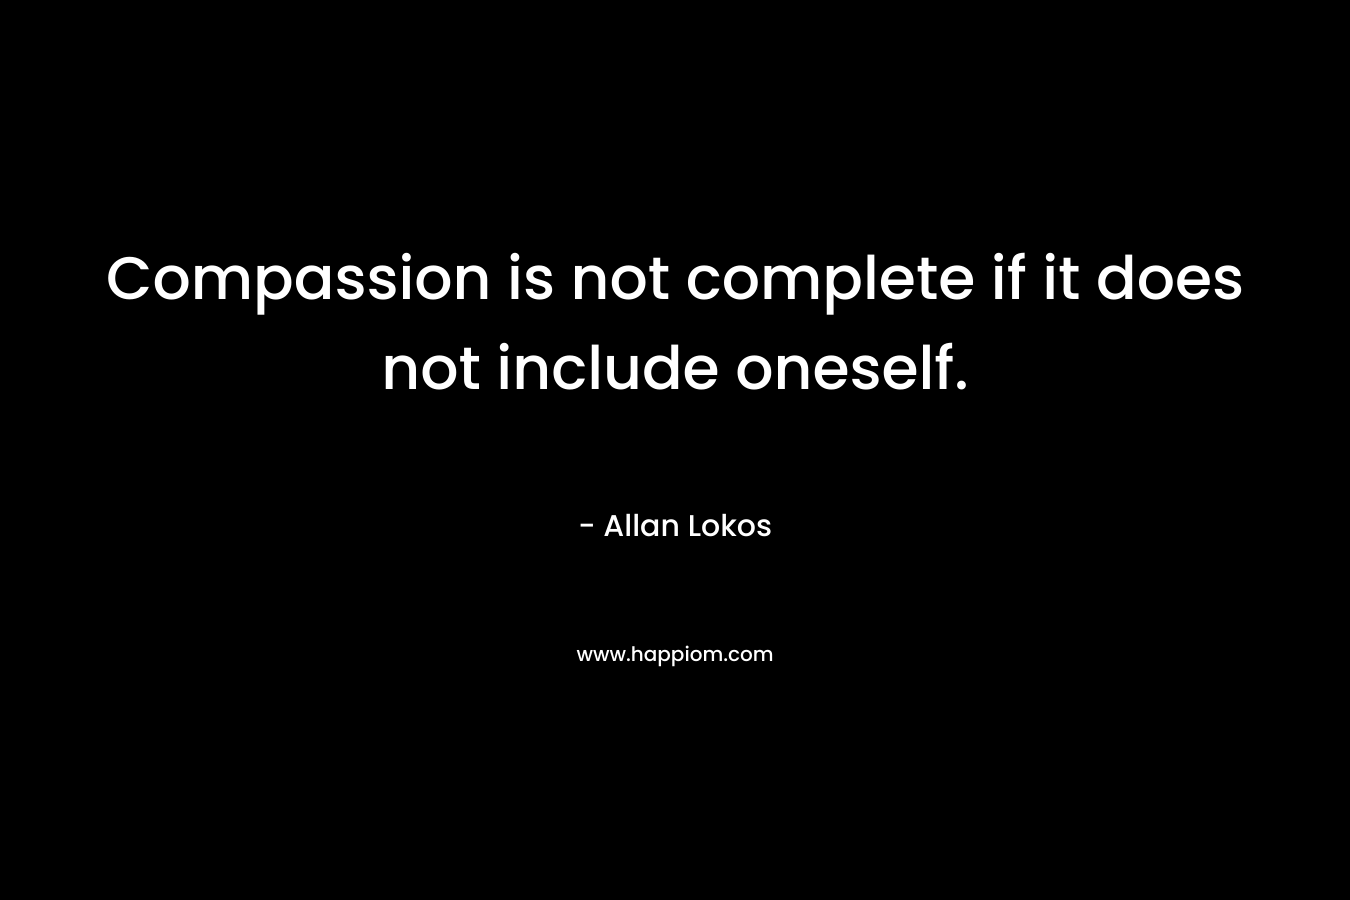 Compassion is not complete if it does not include oneself. – Allan Lokos